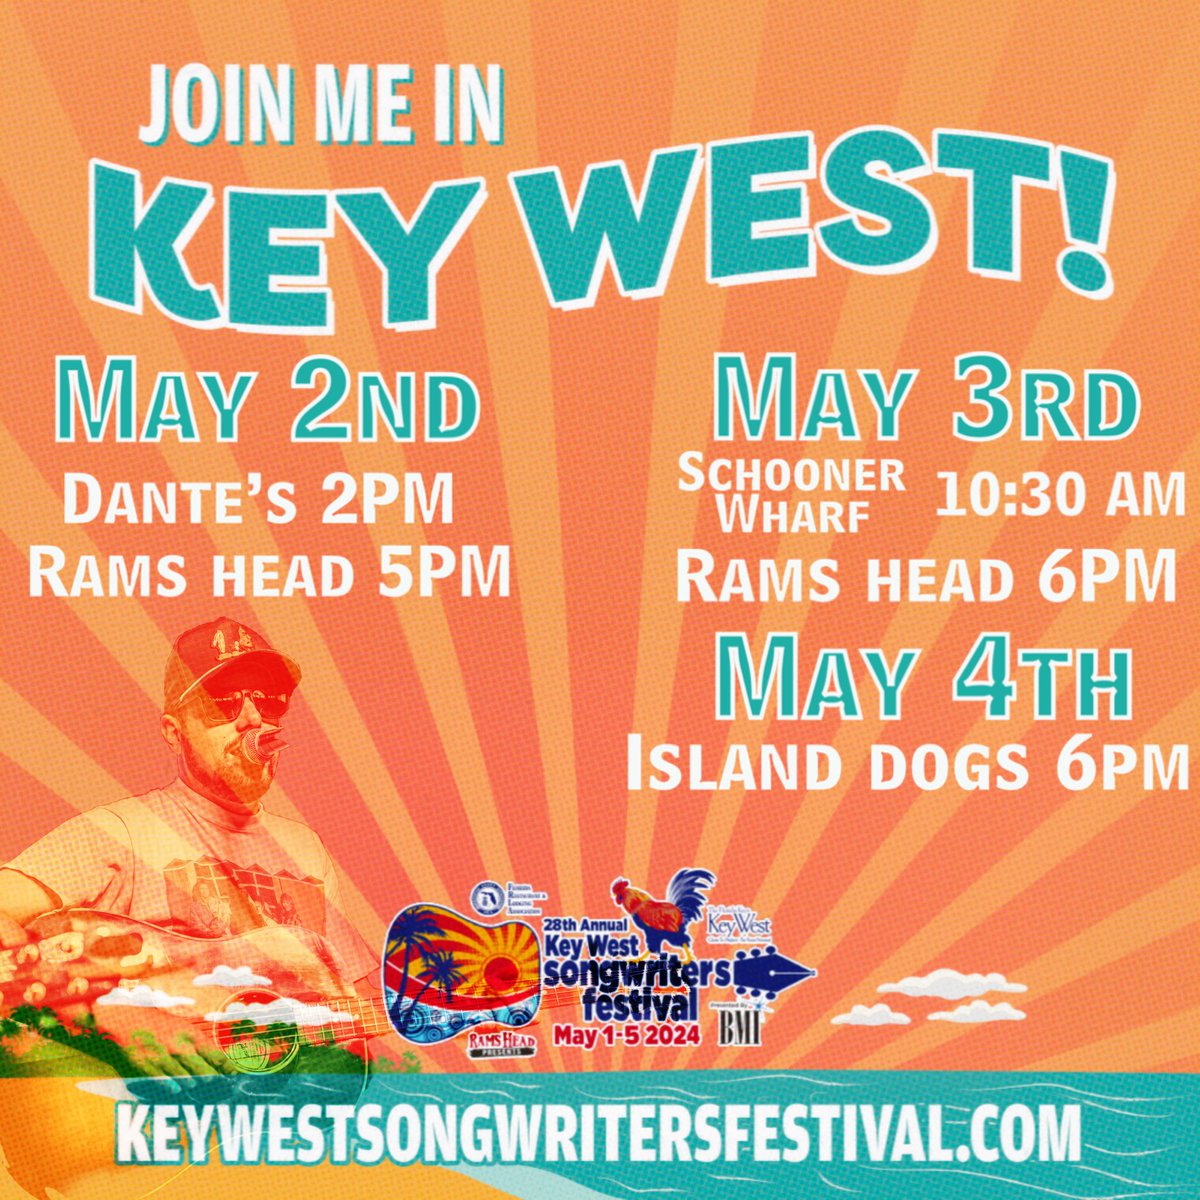 Pumped to be back at the @bmi @KWSWF Festival this weekend. 🌴🌴
If you’re in the keys come on out!